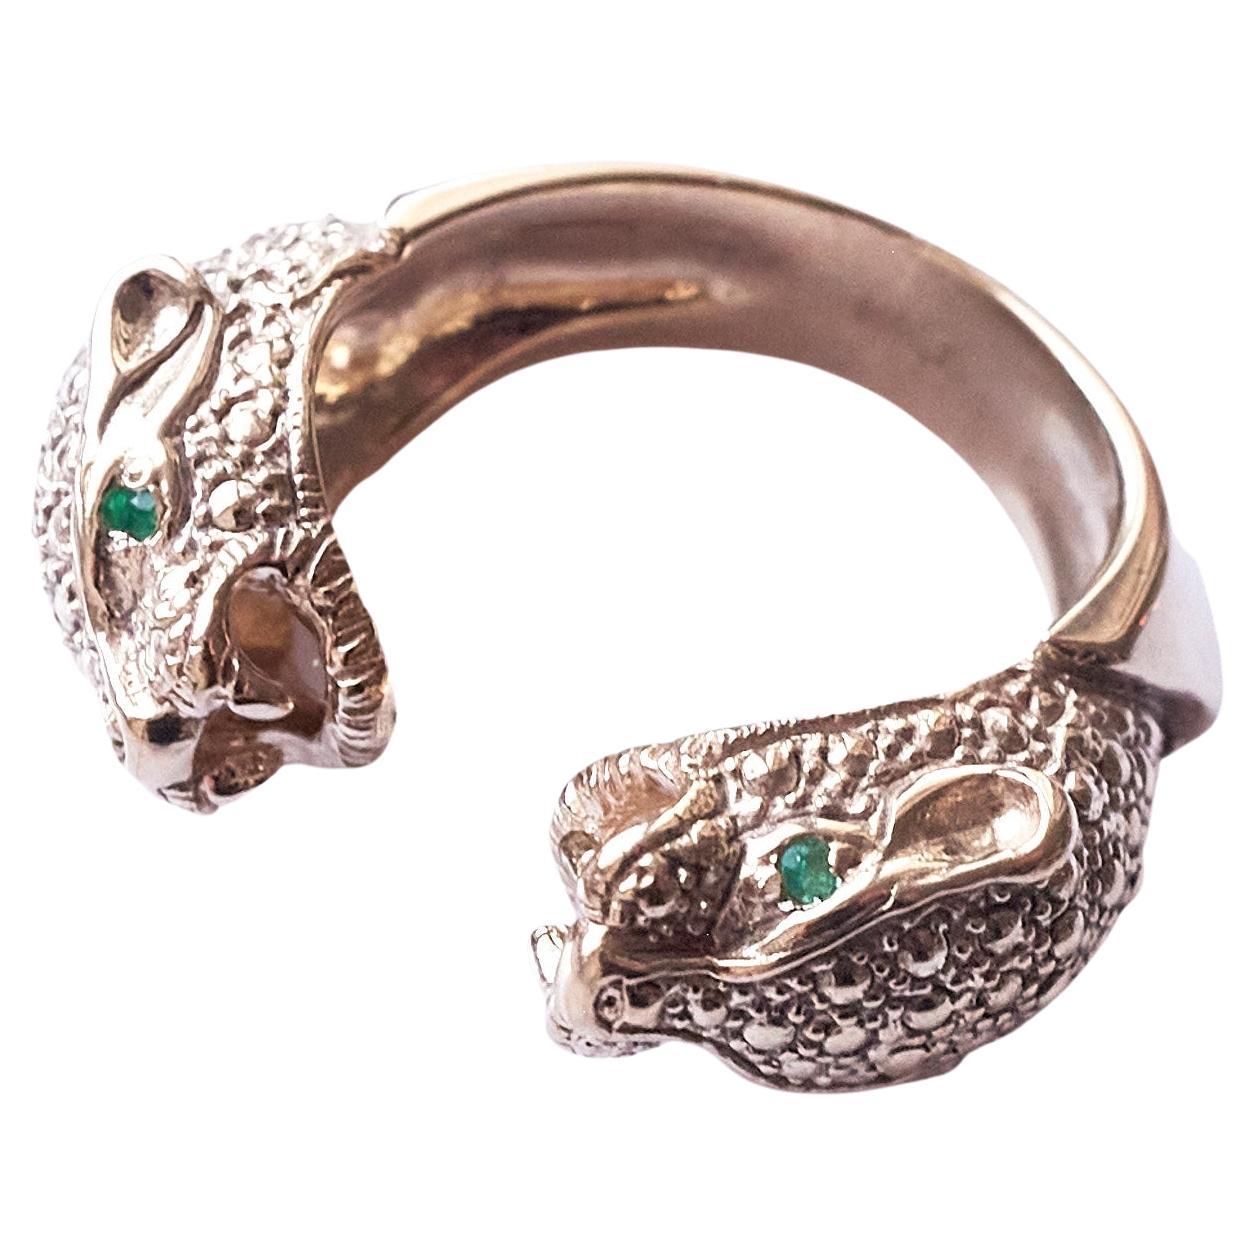 Early Victorian Emerald Jaguar Ring Bronze Animal Jewelry Cocktail Ring J Dauphin For Sale